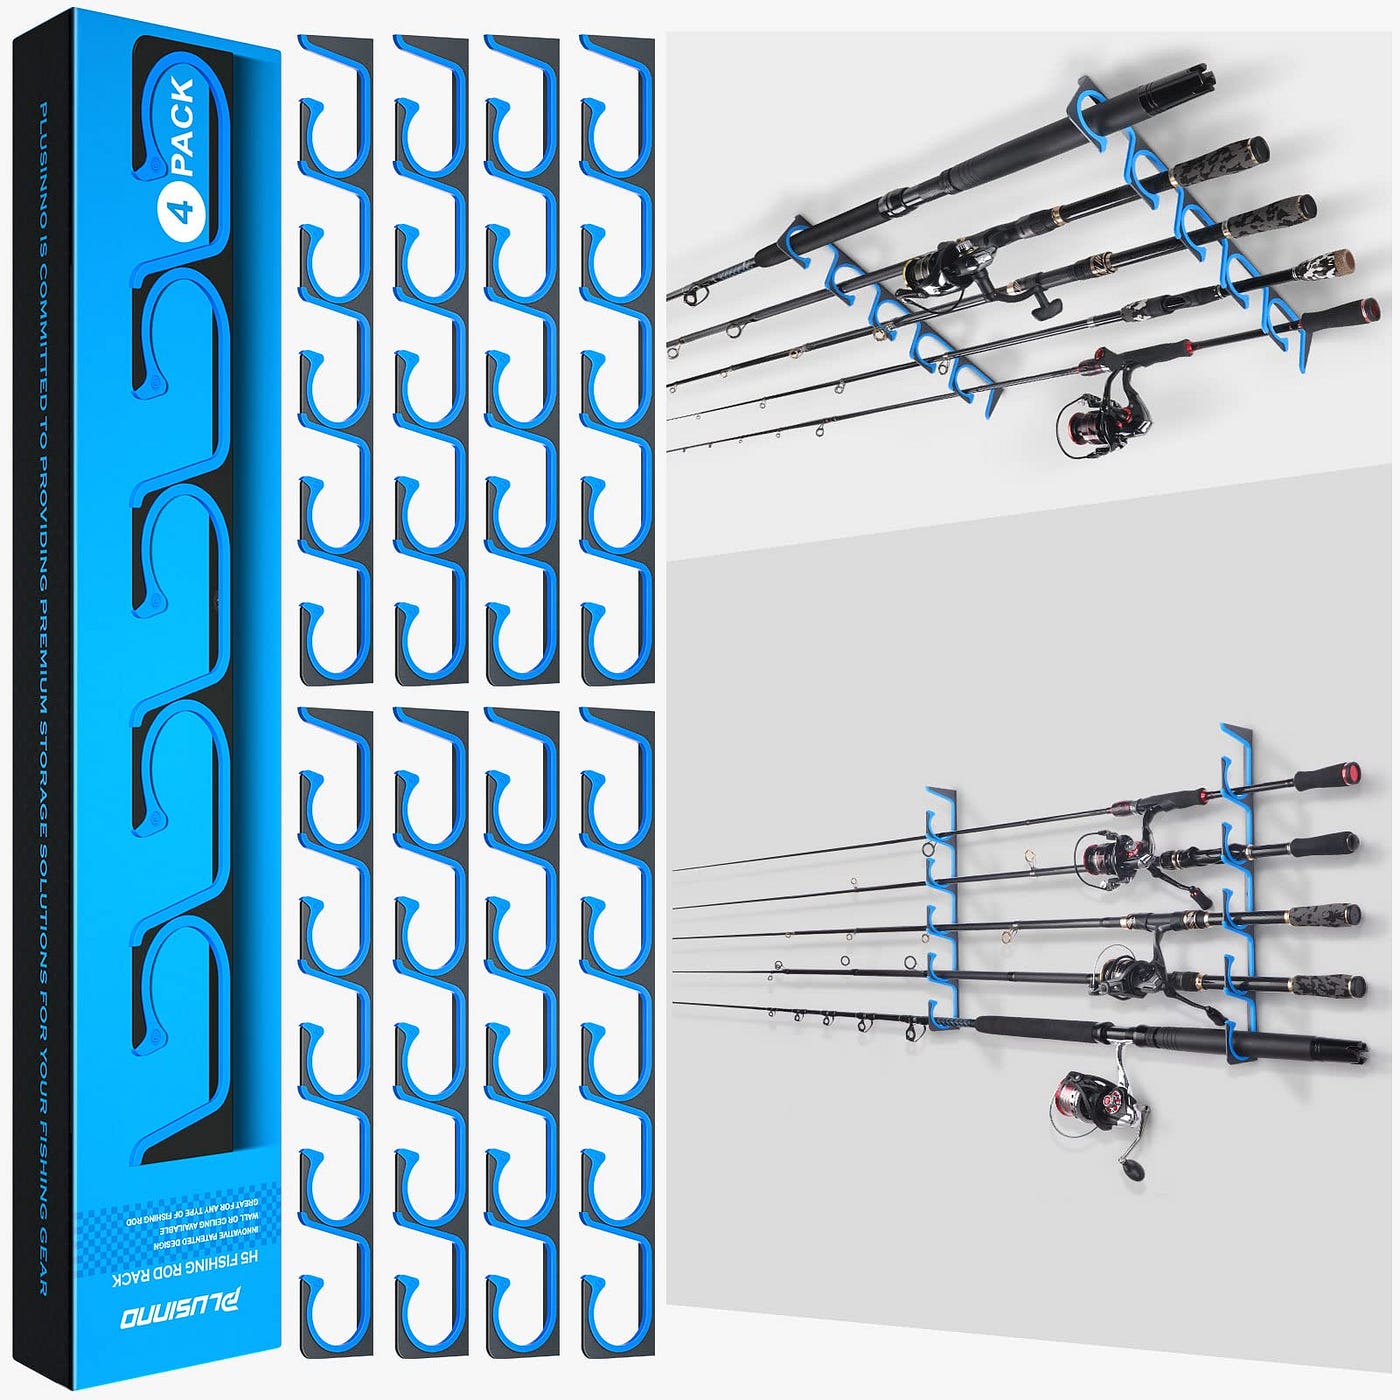 Cheap & Easy Fishing Pole Rack Holder PVC Pipe For Ceiling Or